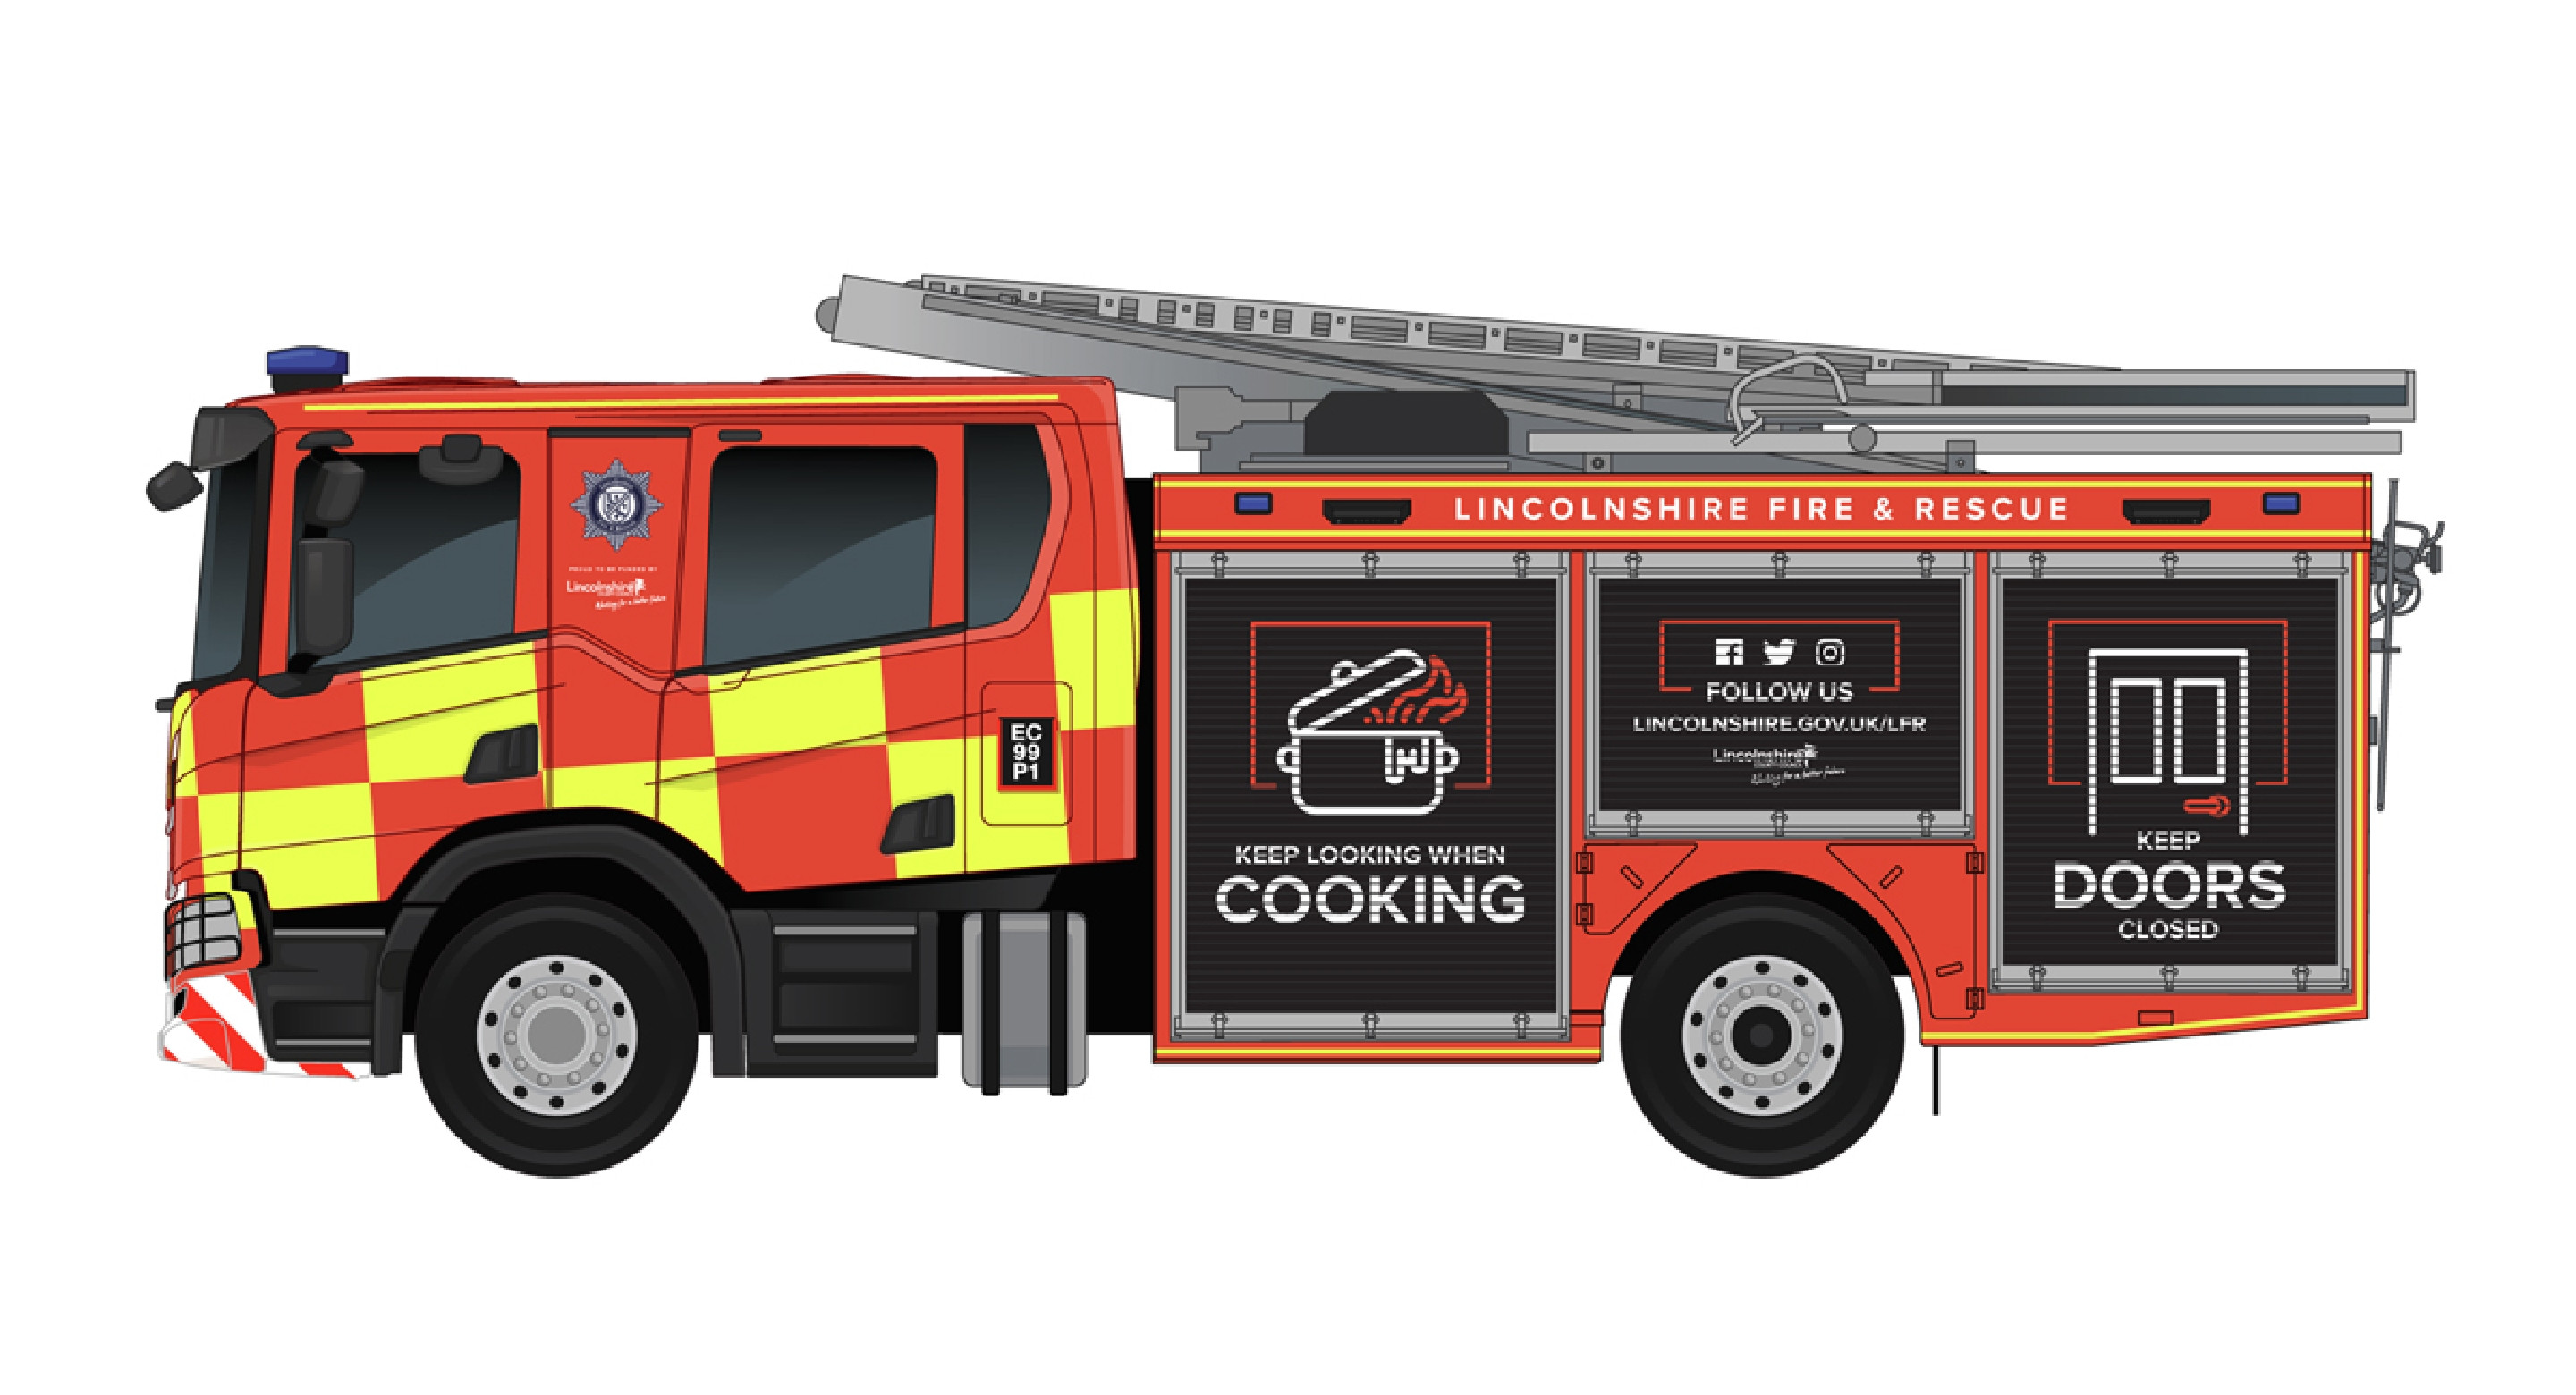 Lincs Fire & Rescue Livery Vehicle Wraps by Root Studio